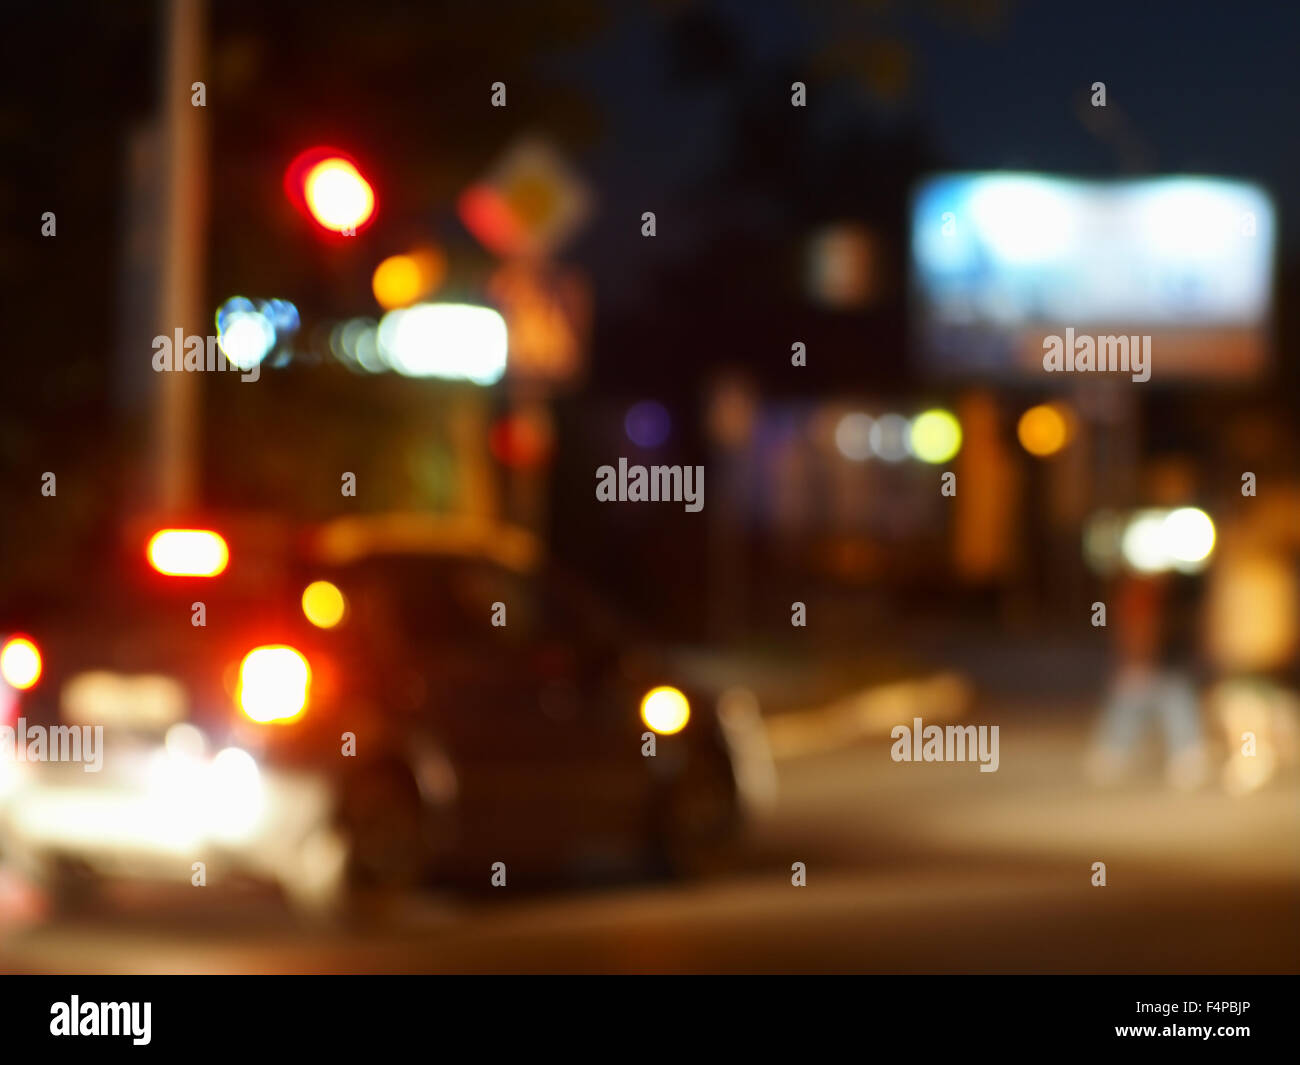 Abstract night scene with dim lights and headlights. Blur and defocused lights from the headlights of cars and traffic lights ca Stock Photo